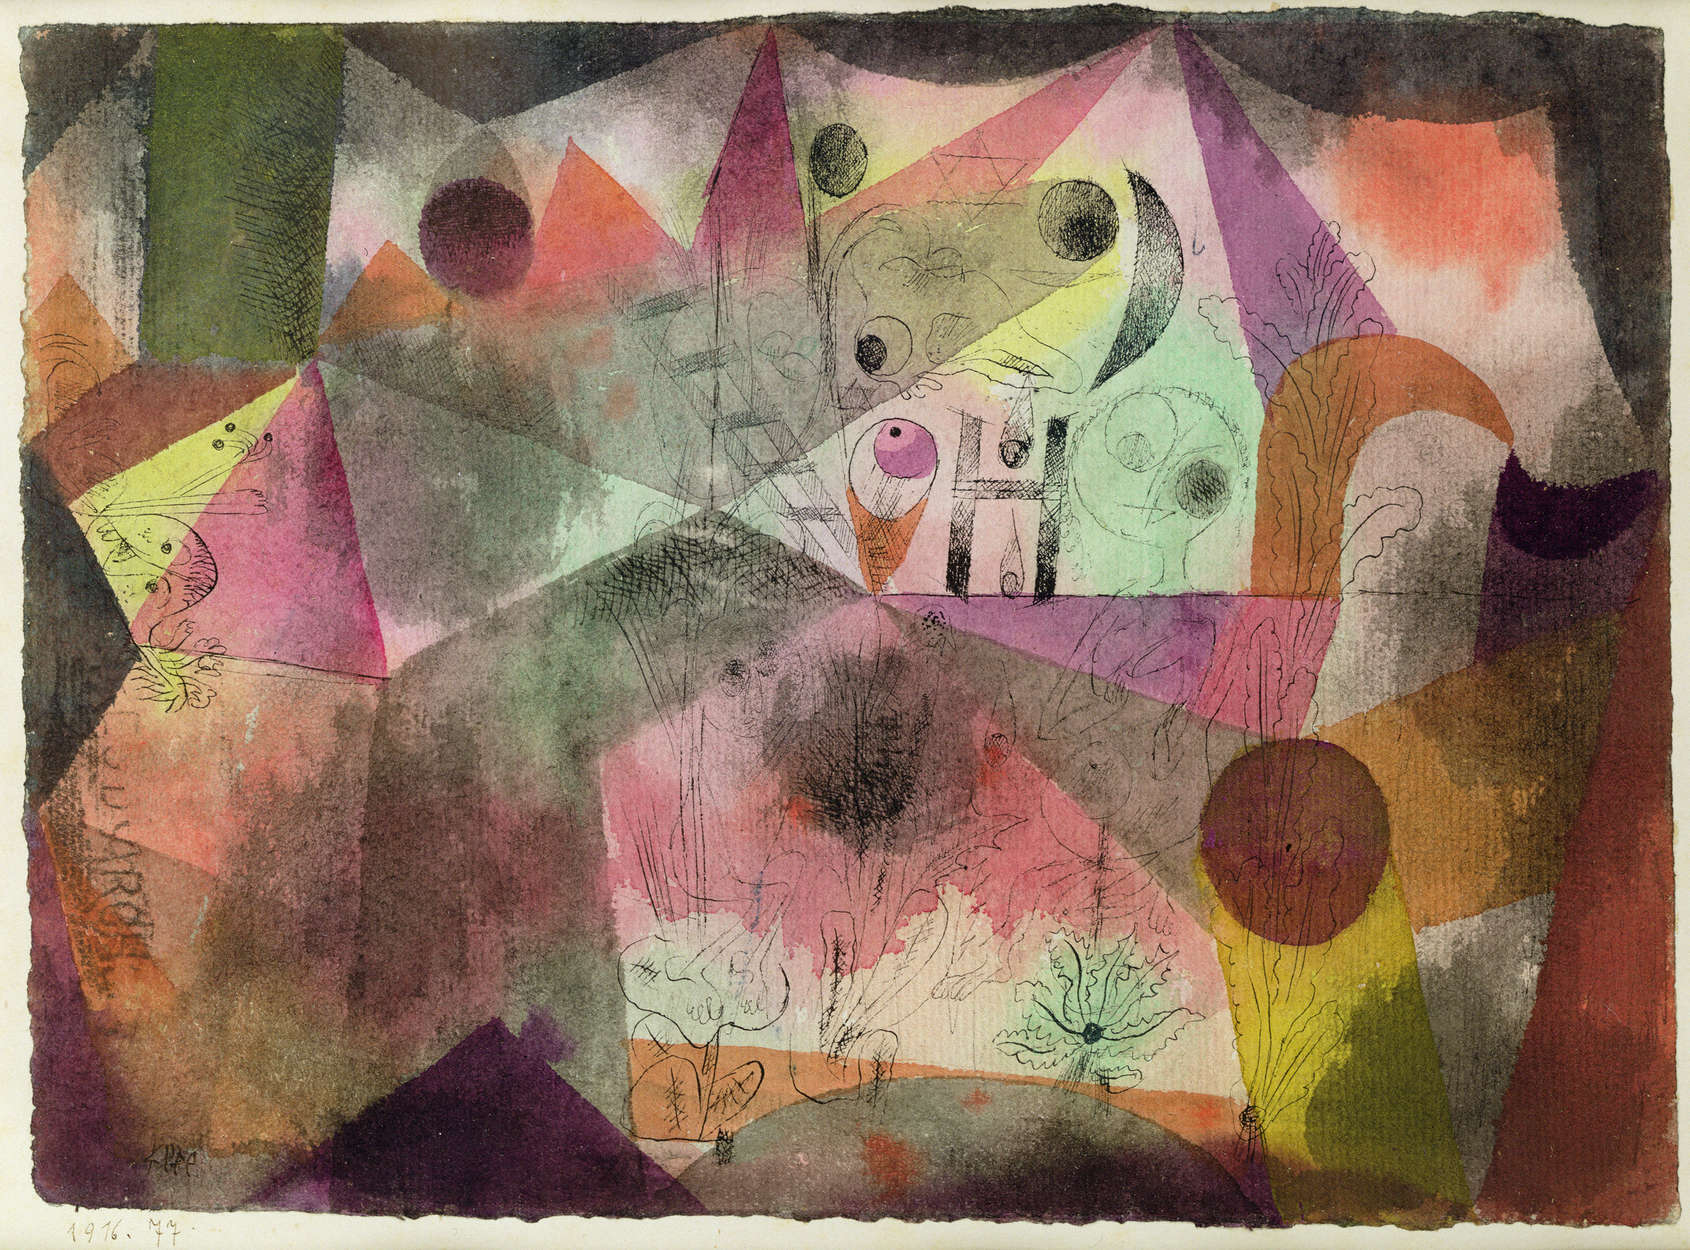             Photo wallpaper "With the H" by Paul Klee
        